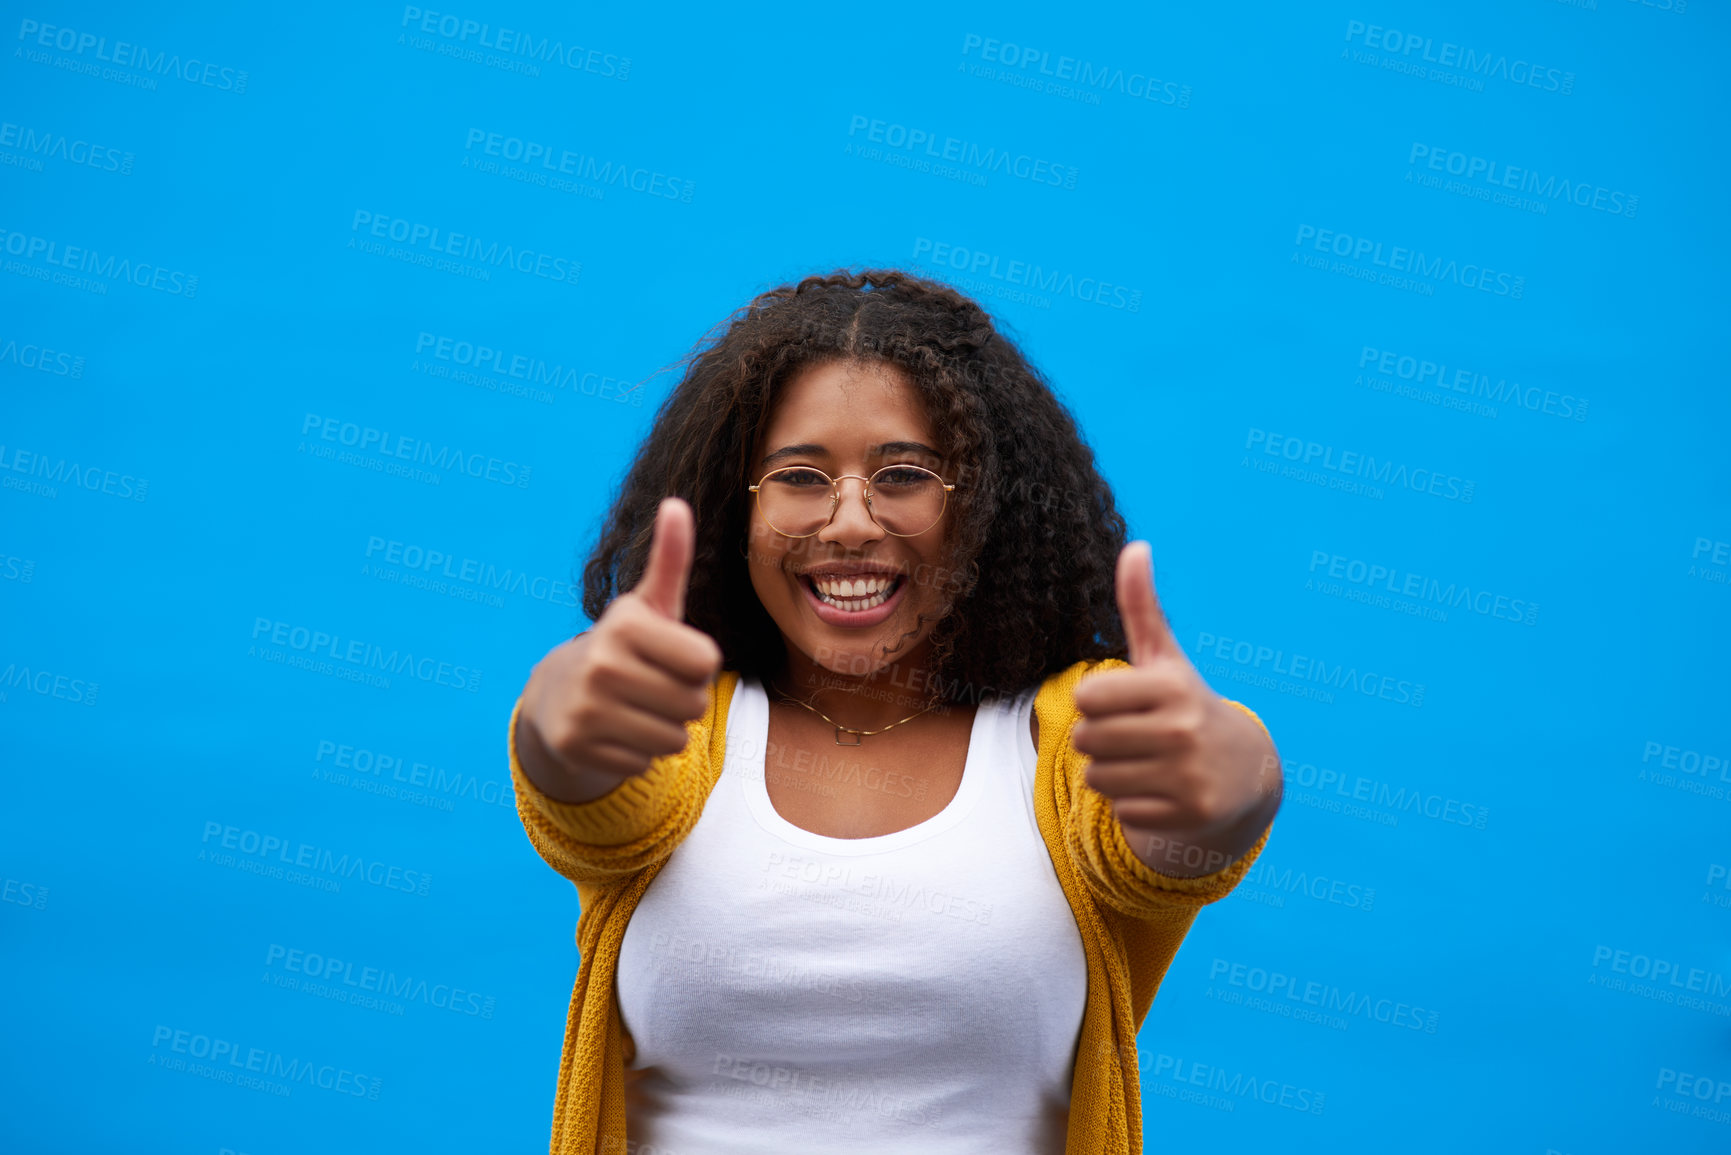 Buy stock photo Cropped portrait of an attractive young woman showing thumbs up against a blue background